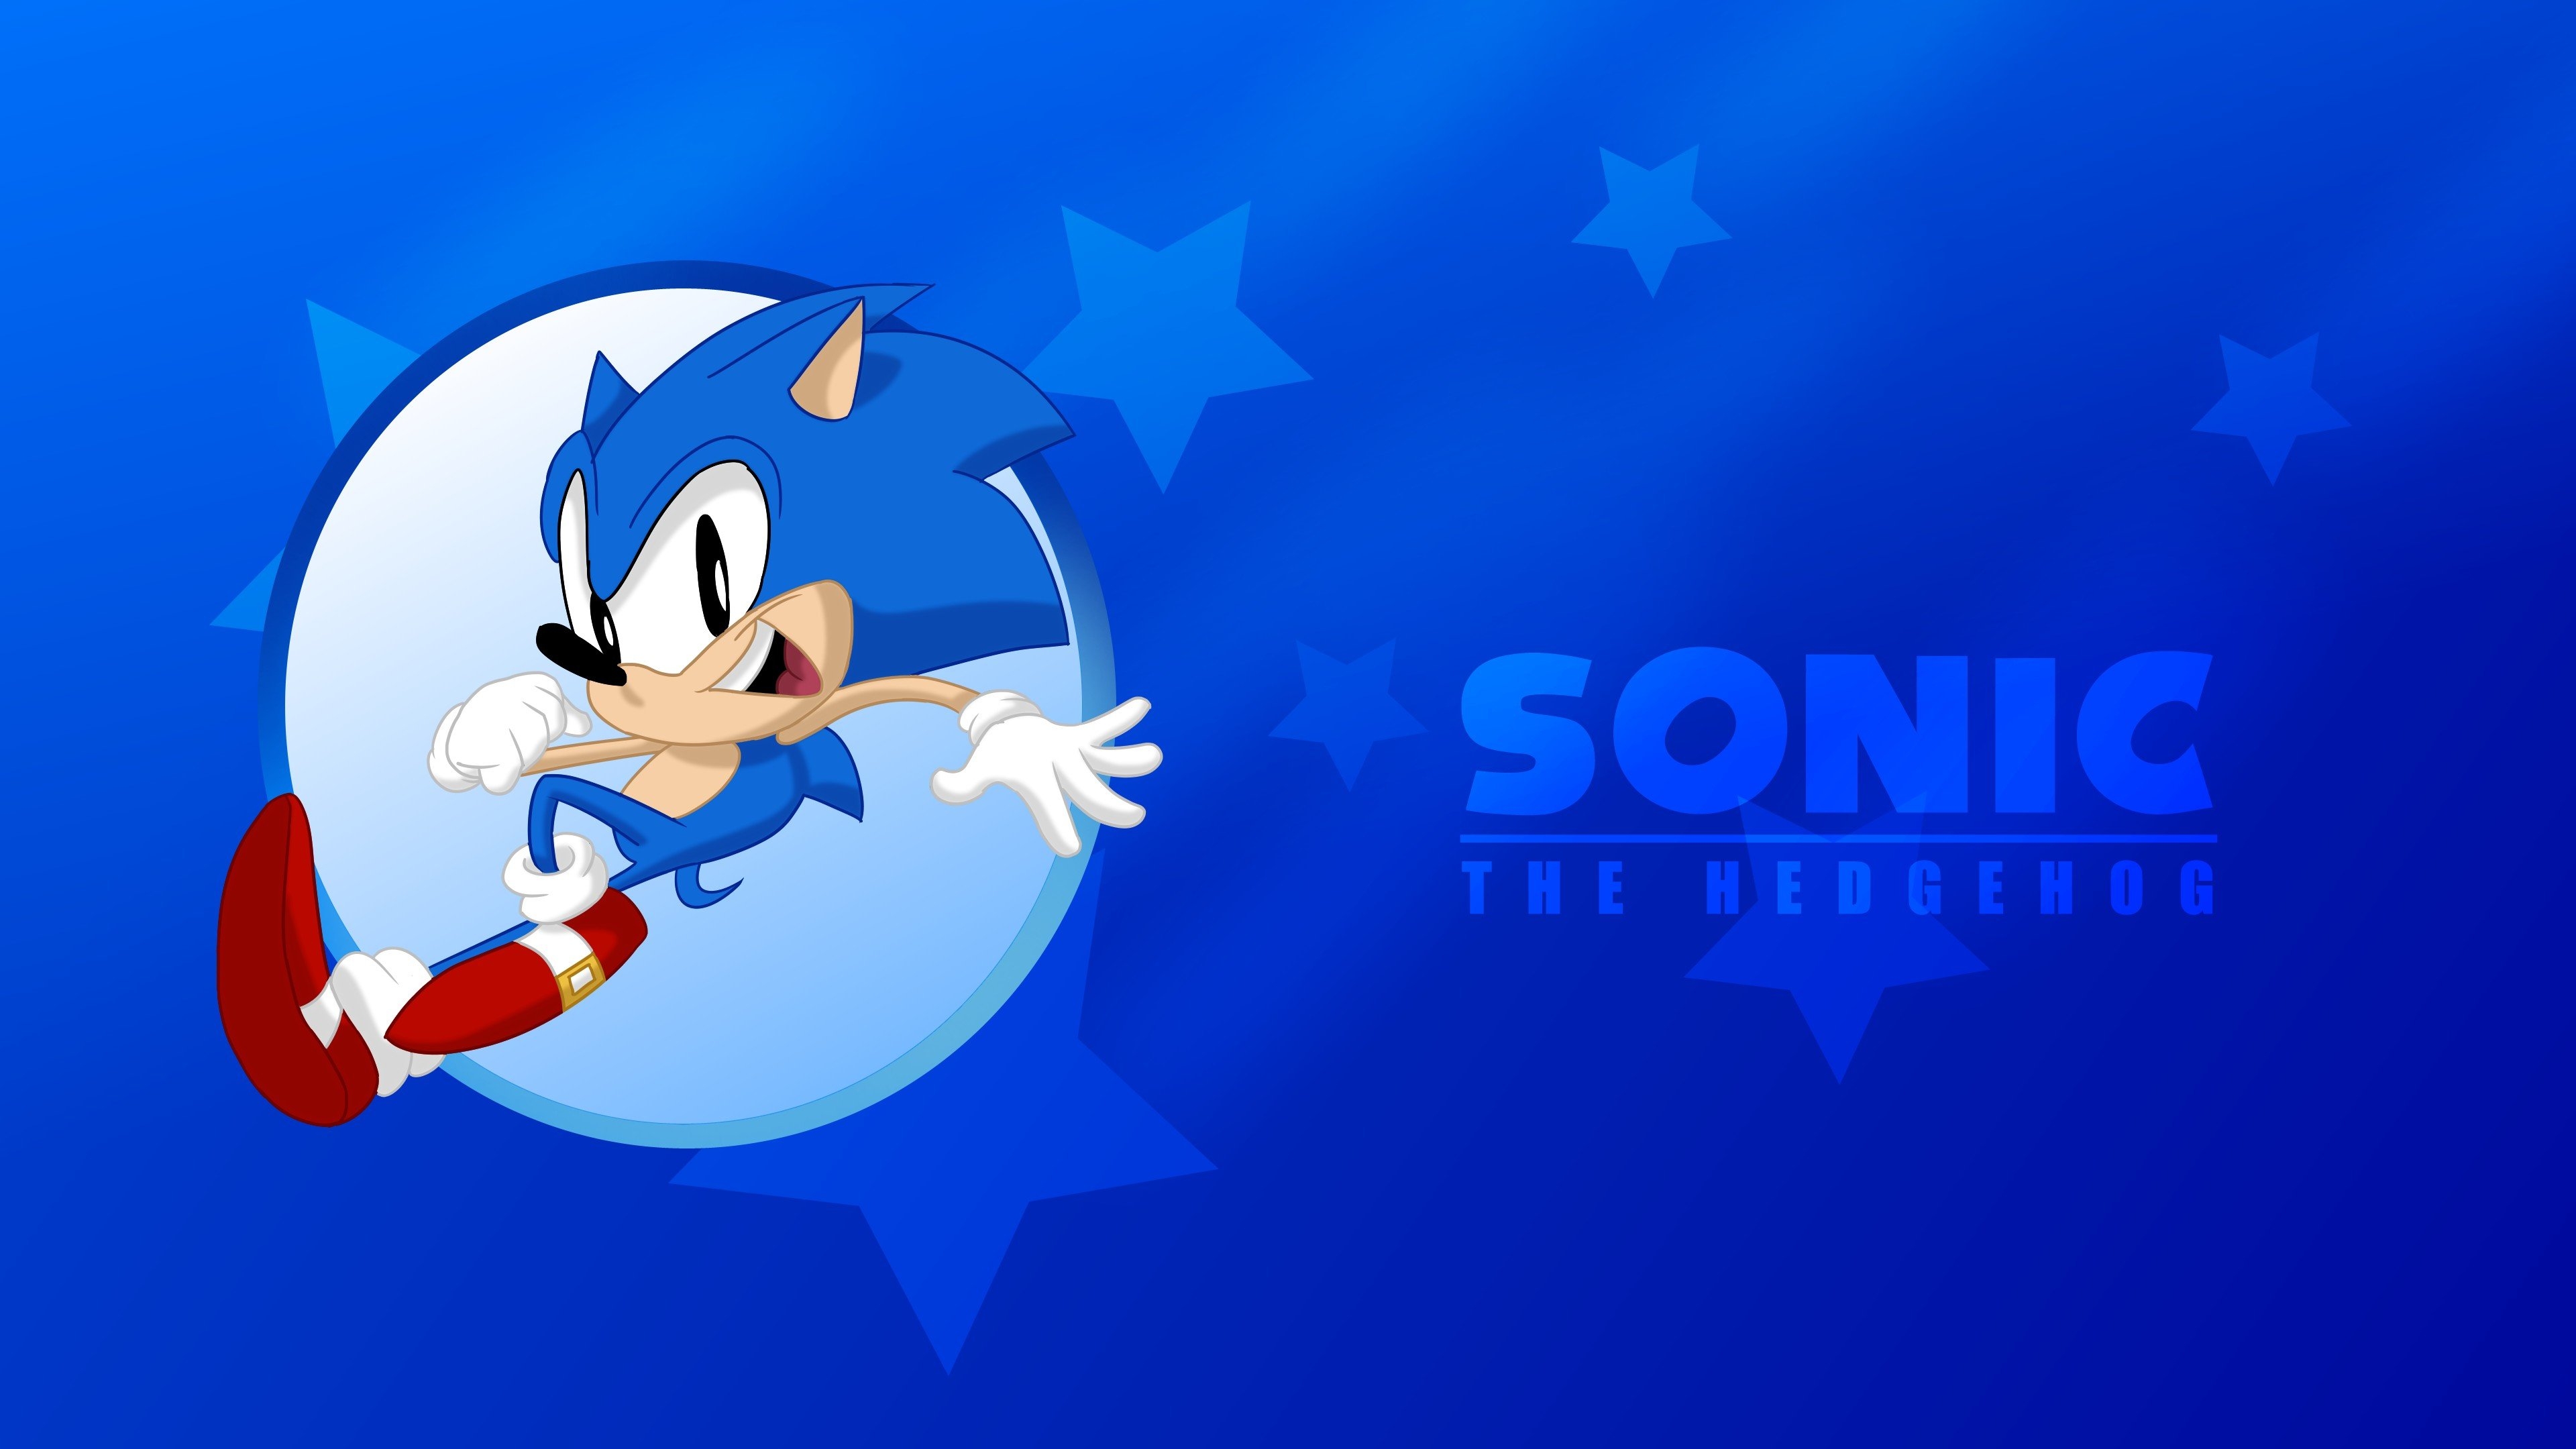 Cool sonic backgrounds